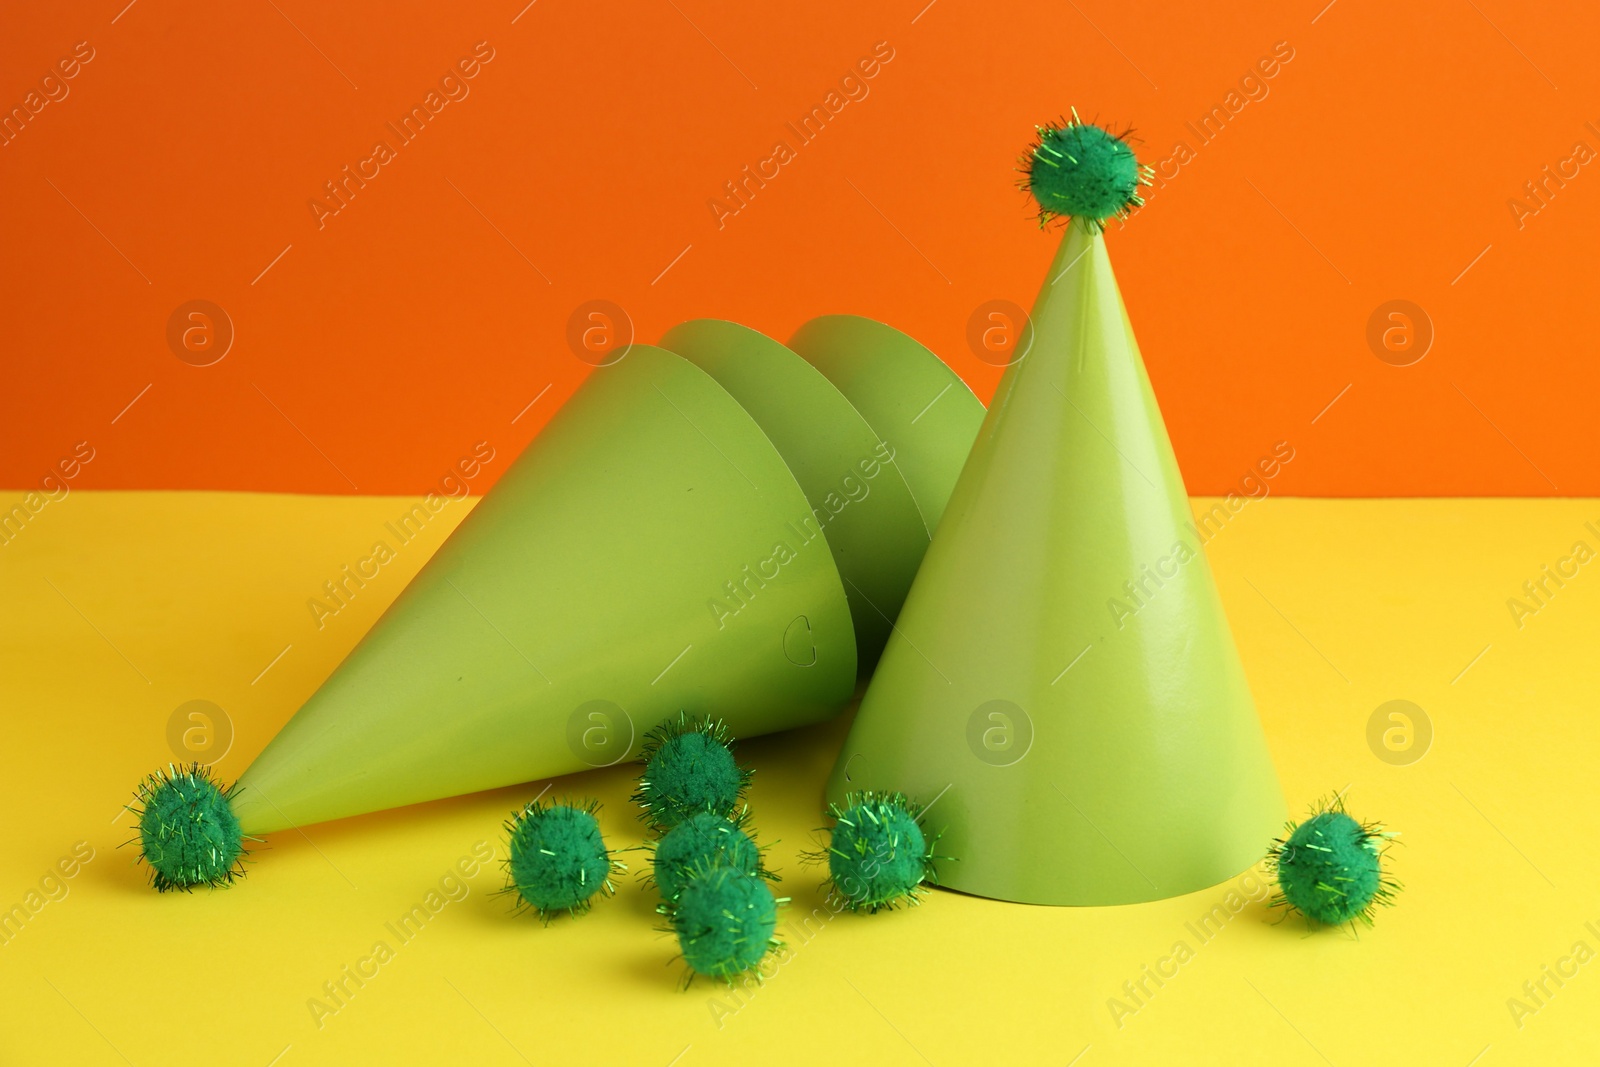 Photo of Party hats on yellow table against orange background